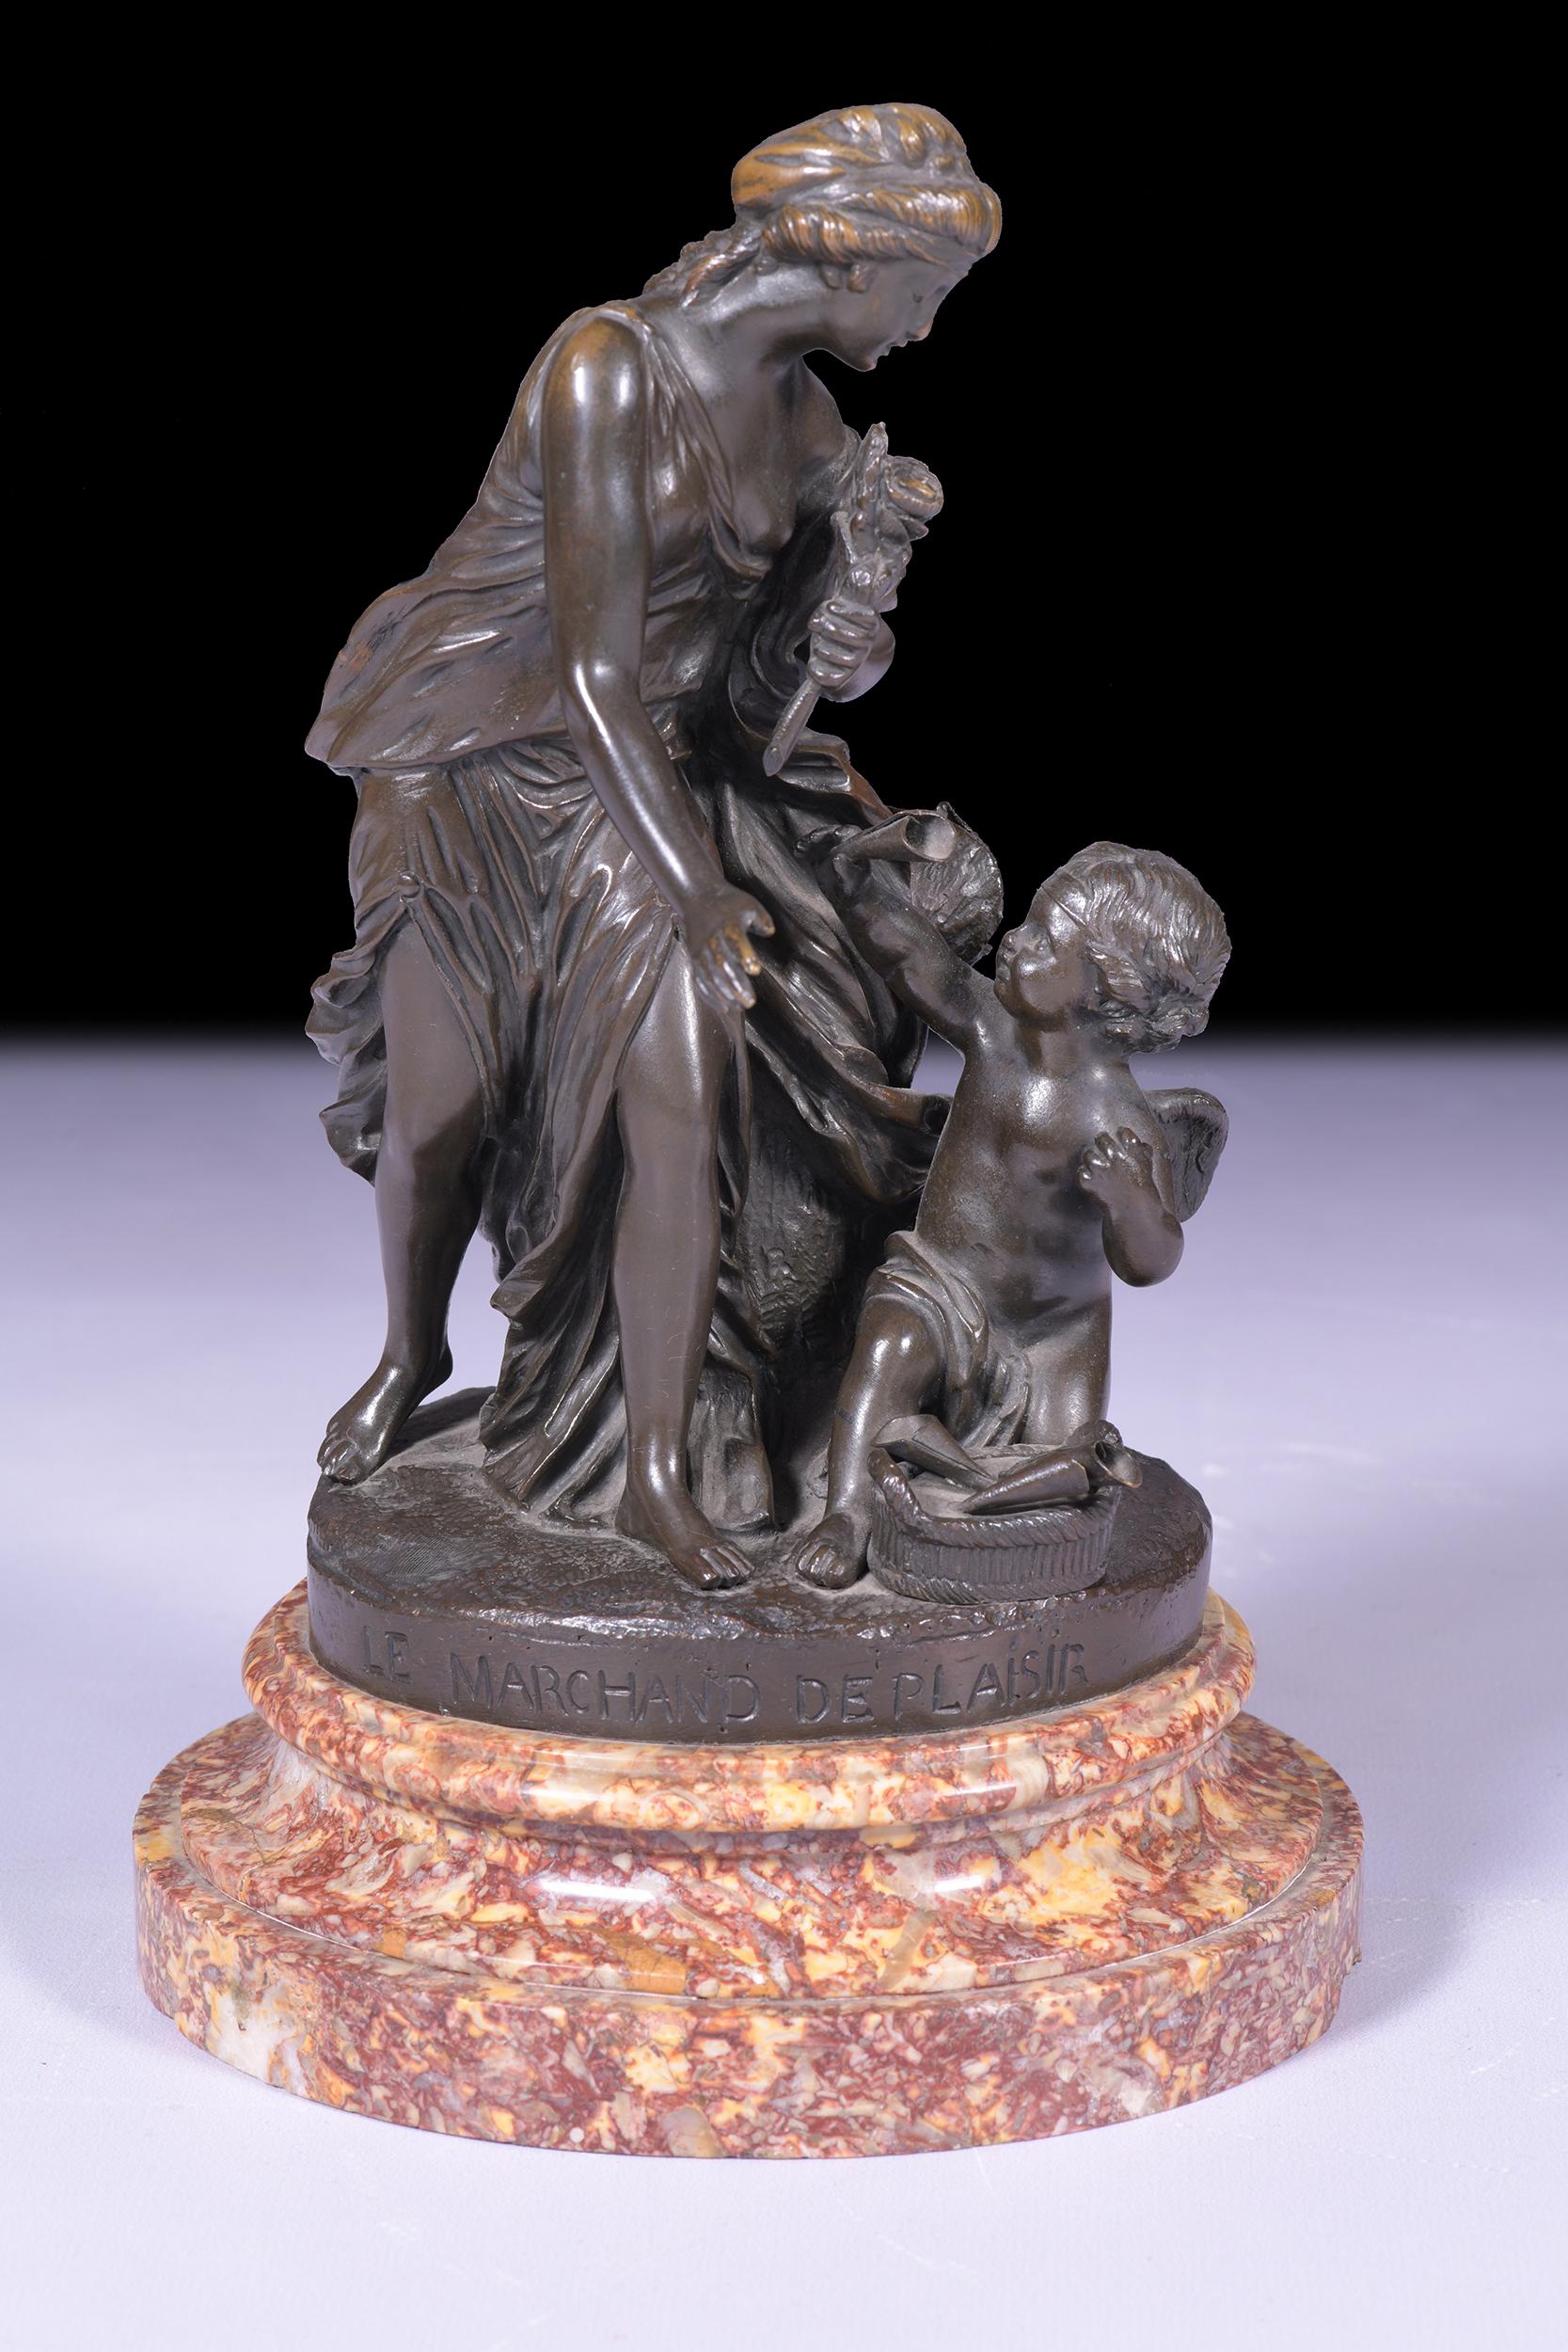 A superb bronze model of a classical maiden and a putto entitled 'Le Merchand de Plaisir' the winged putto holding a posey vase, the maiden with a rose, on a naturalistic base, signed Pigal, on a cylindrical marble base.

Circa